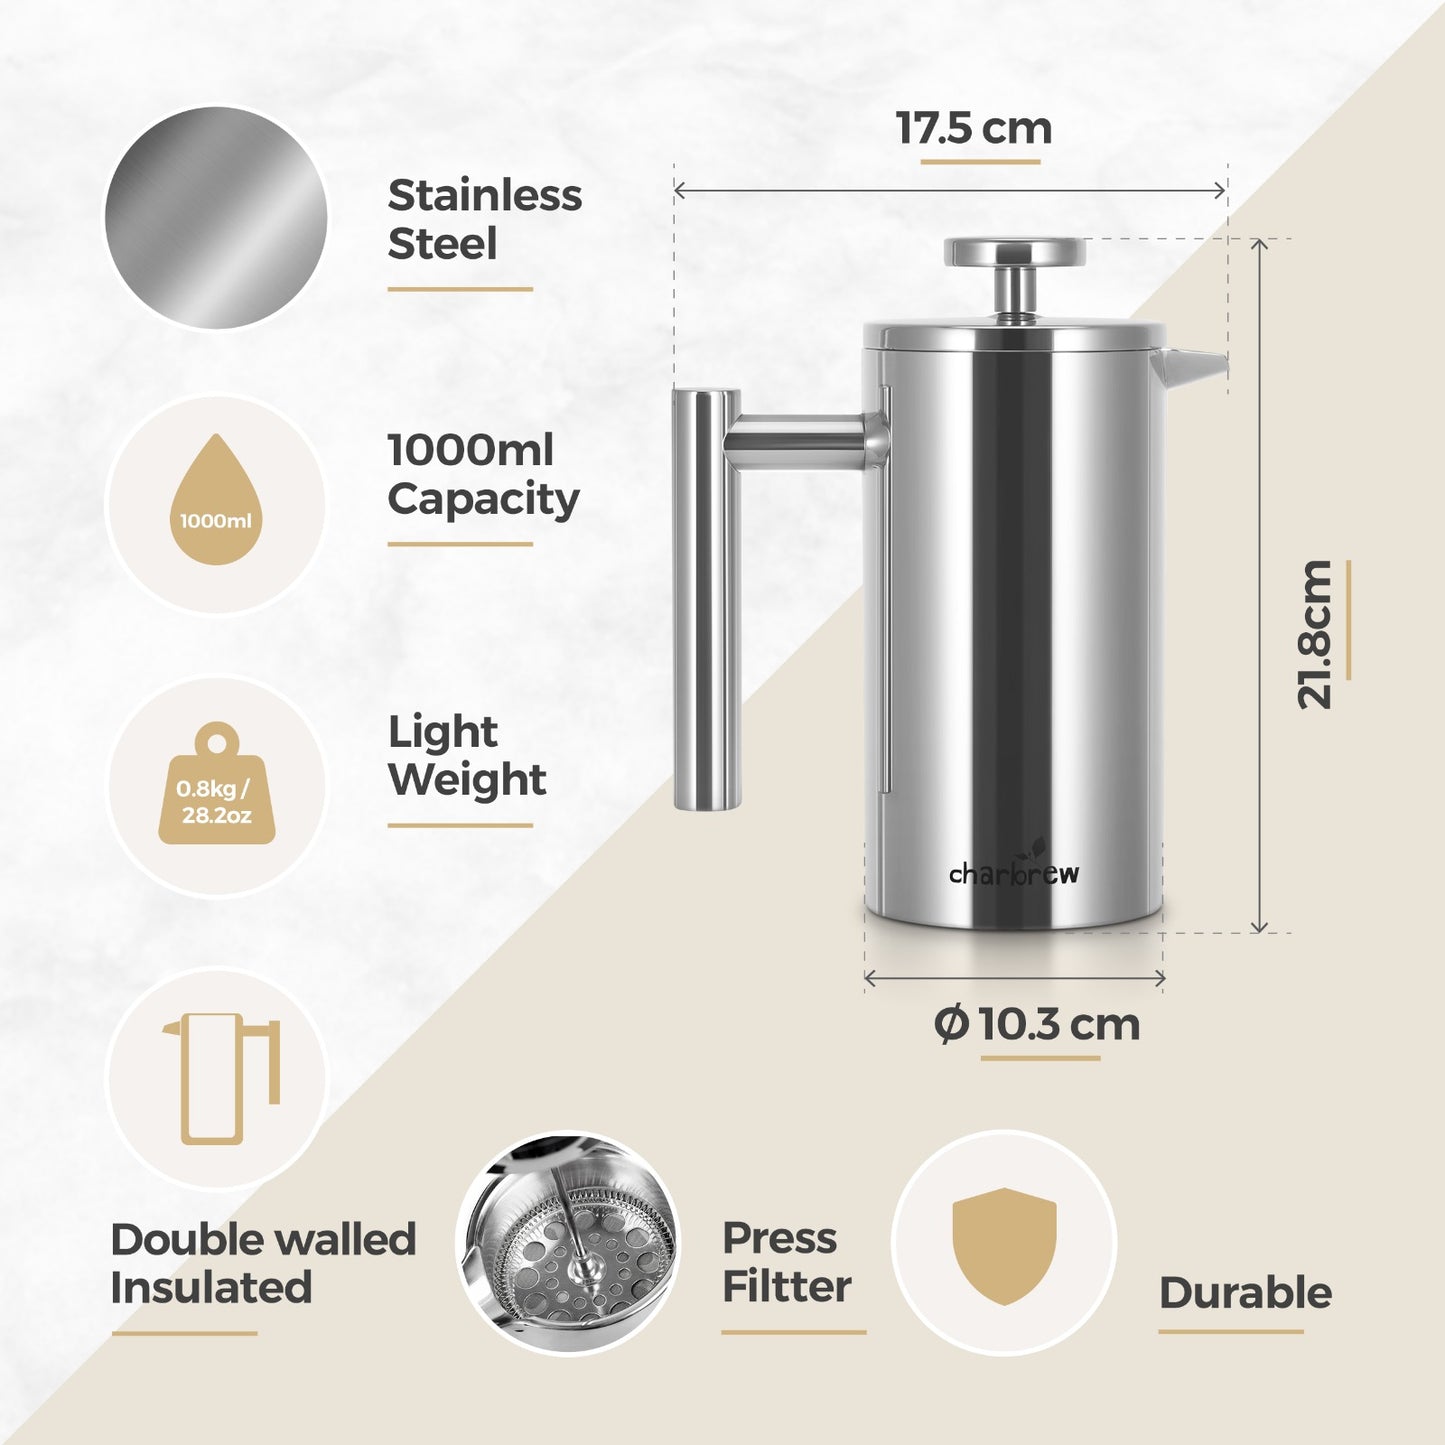 Stainless Steel Cafetiere 1000ml